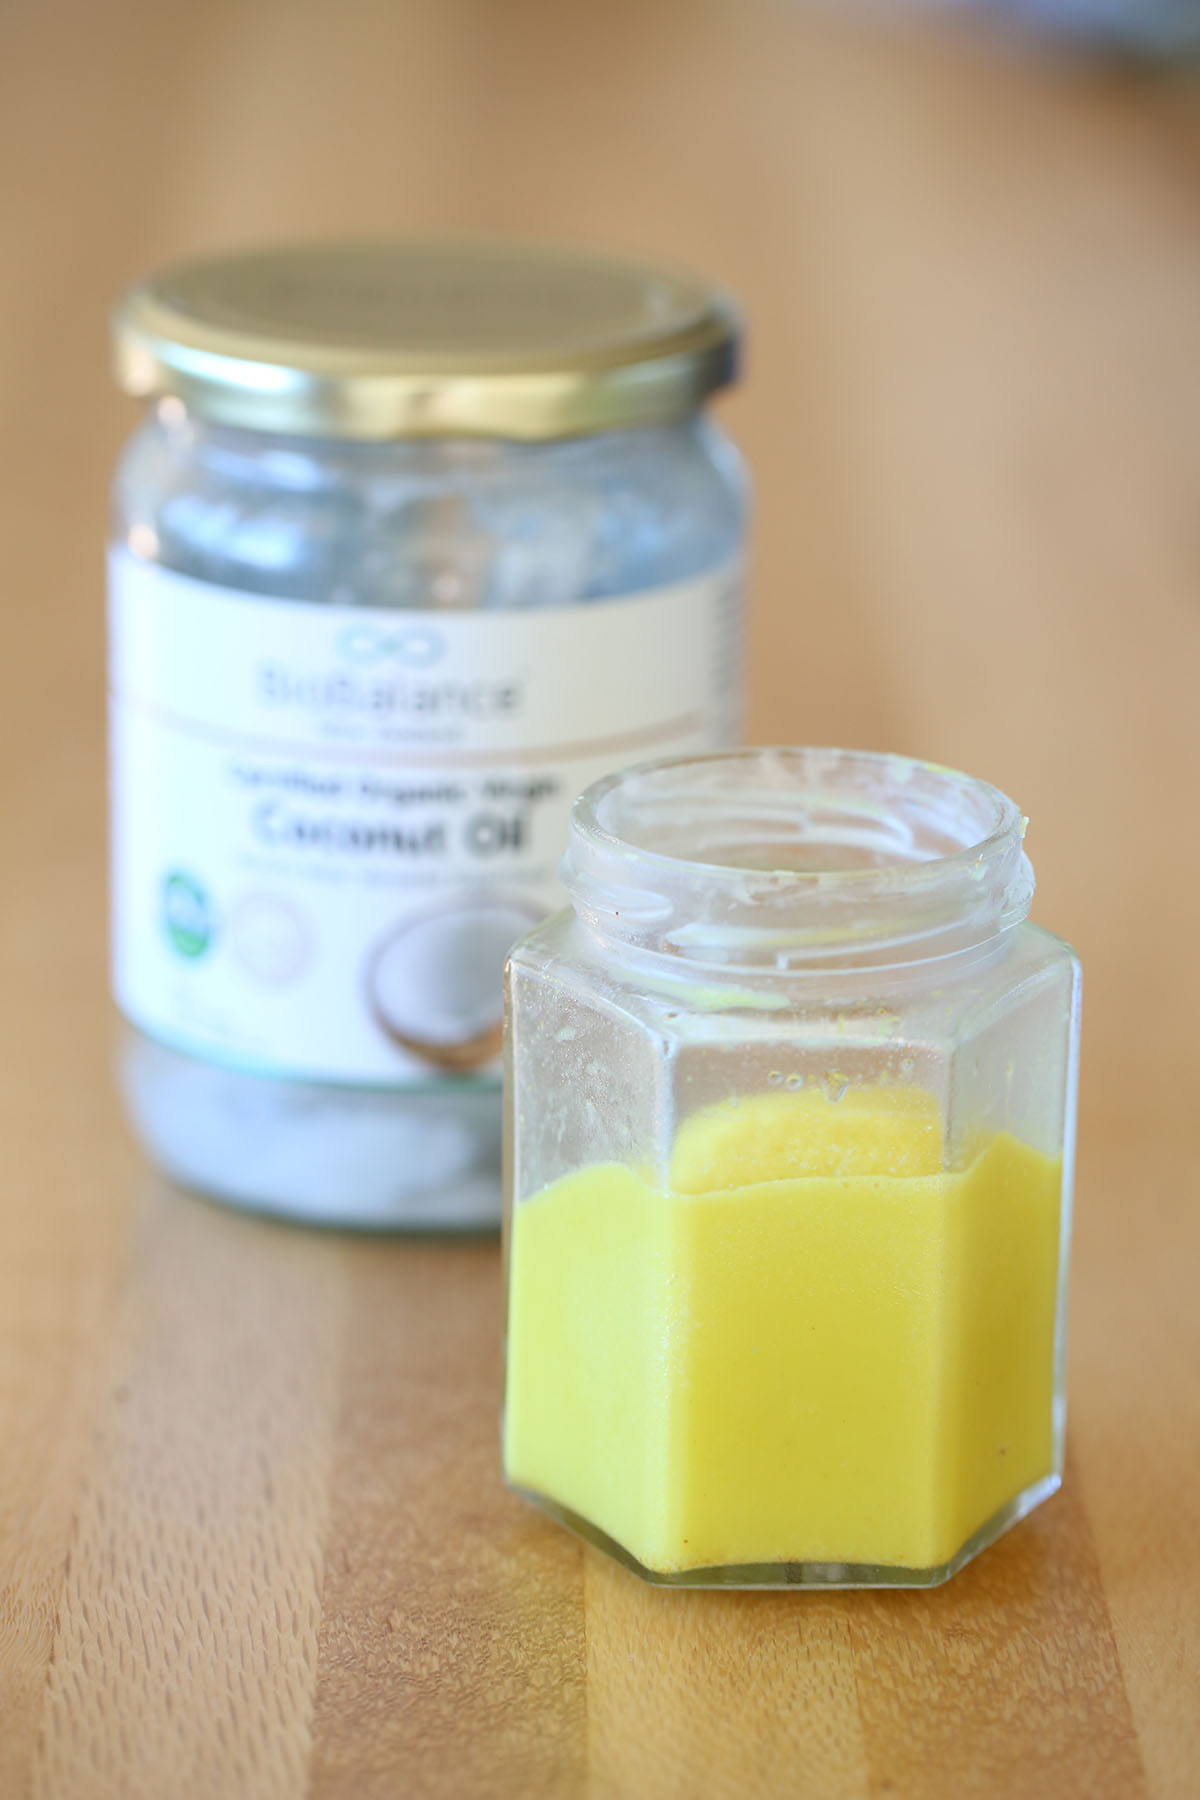 10 Great Reasons to Use Coconut Oil By Buffy Ellen from Be Good Organics